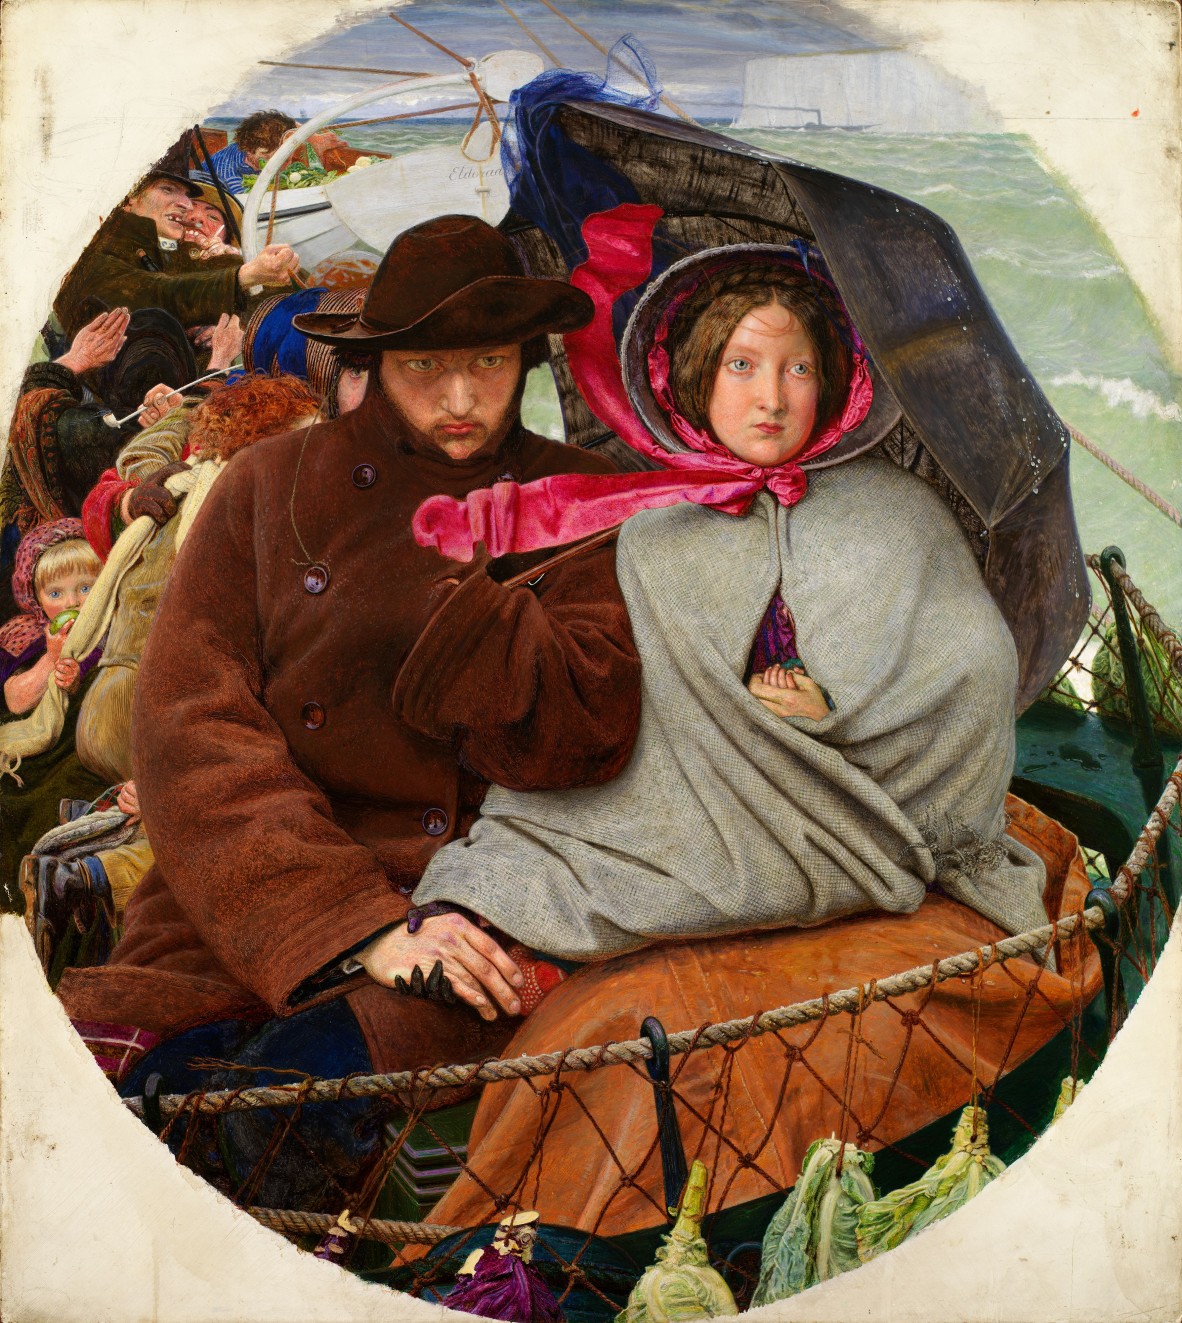 A painting The Last of England by Ford Madox Brown 1855 depicting a man and woman on board an emigrant ship